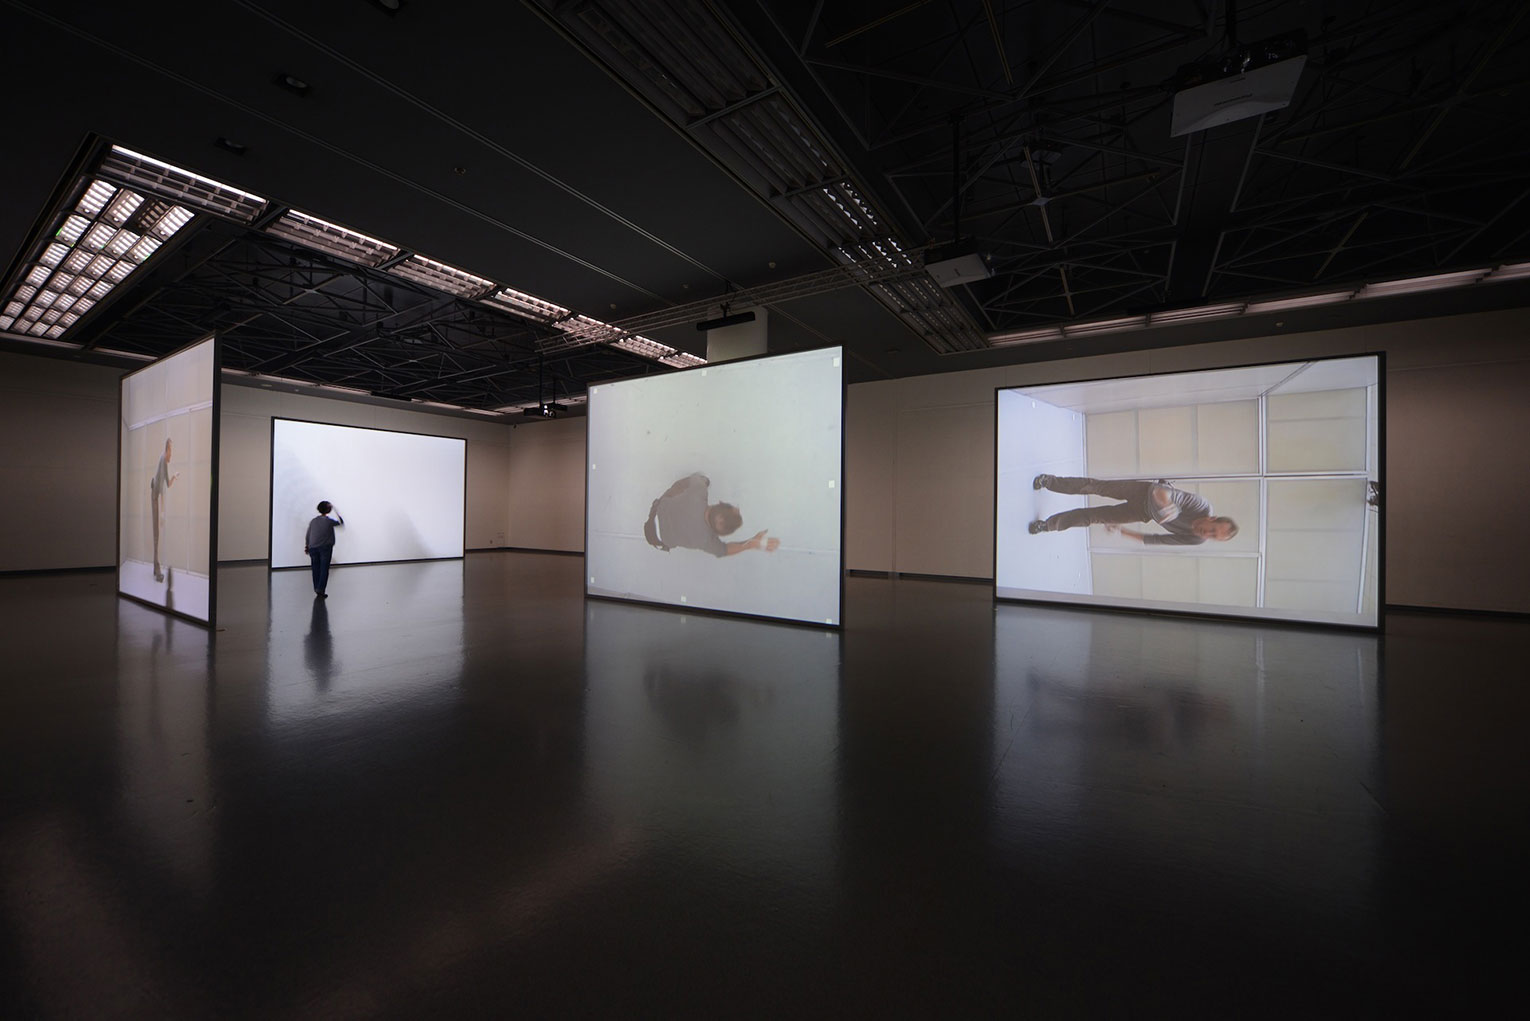 <b>Title: </b>Whenever on on on nohow on | airdrawing<br /><b>Year: </b>2013<br /><b>Medium: </b>Five channel video installation running simultaneously, amplifier, speakers, back projection screens <br /><b>Size: </b>Dimensions variable